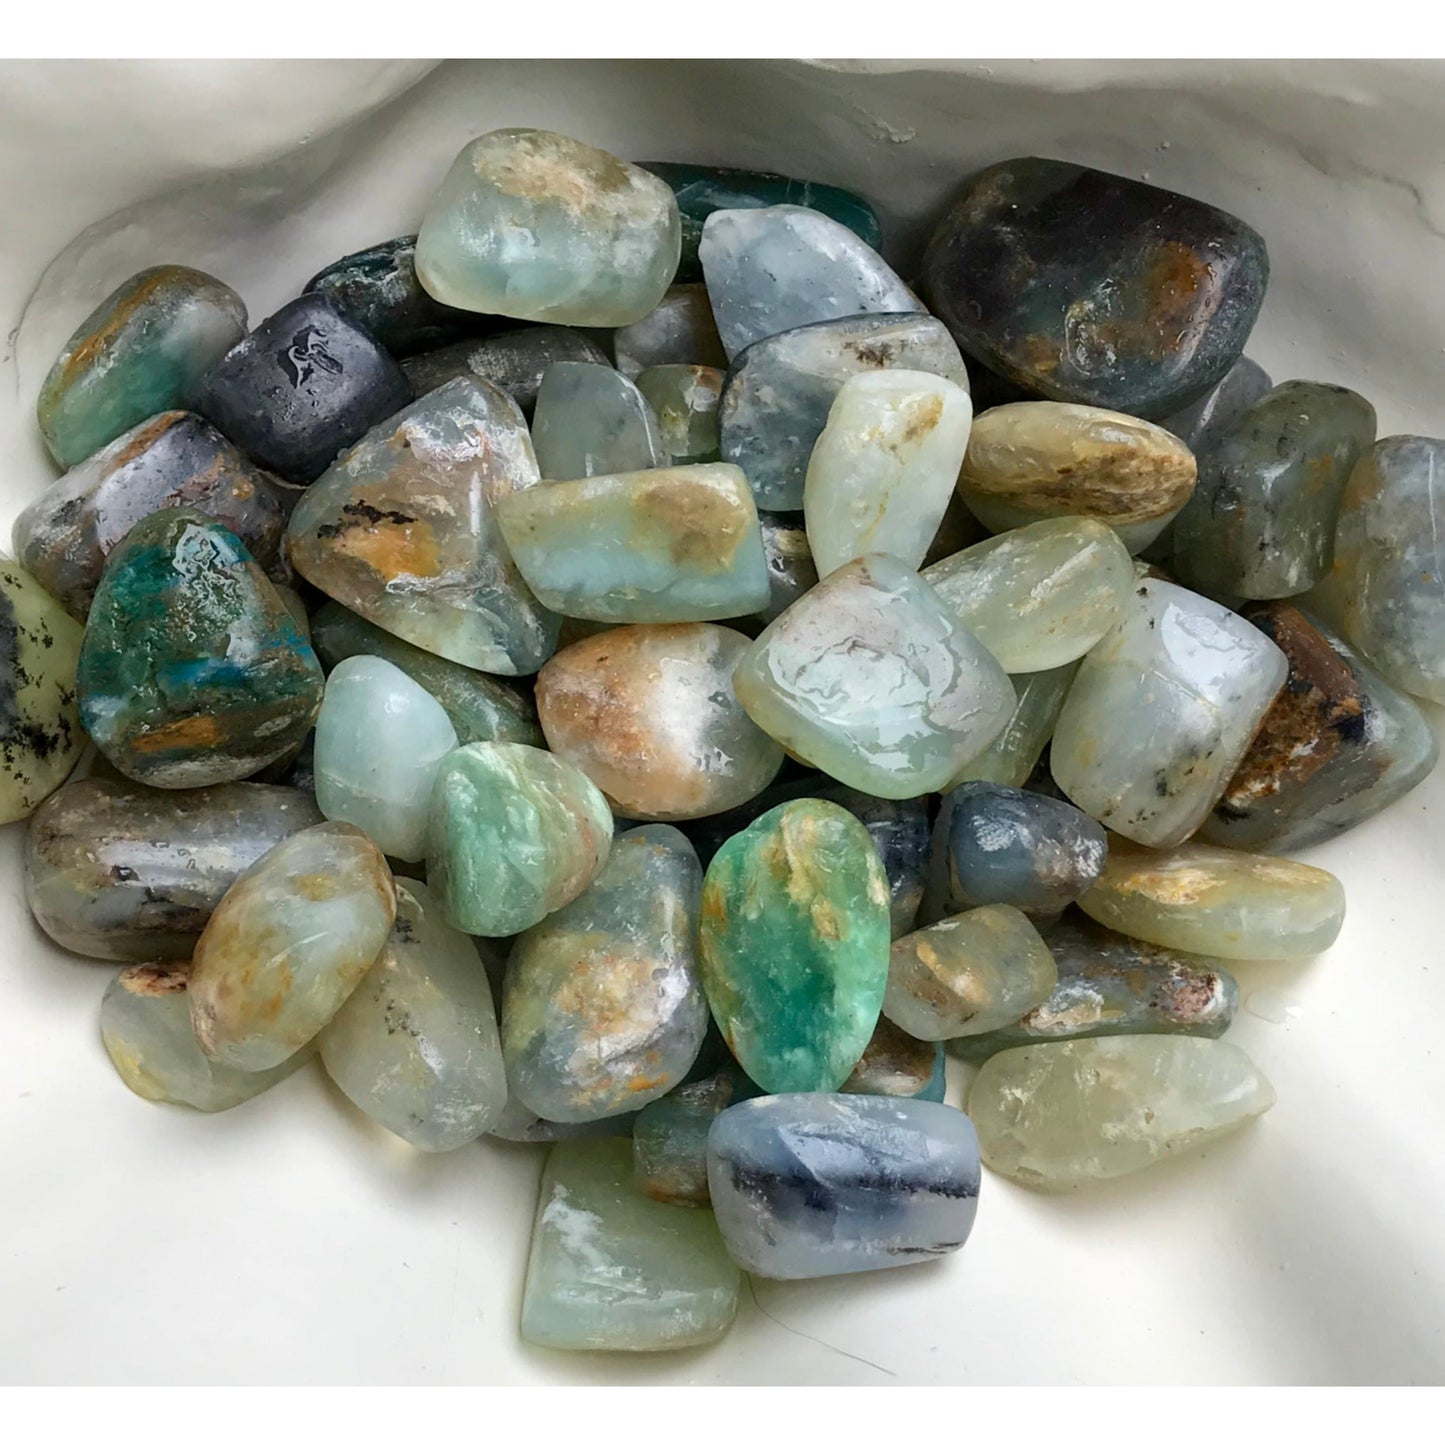 Opal Andean Blue tumbled stones for clear communication!